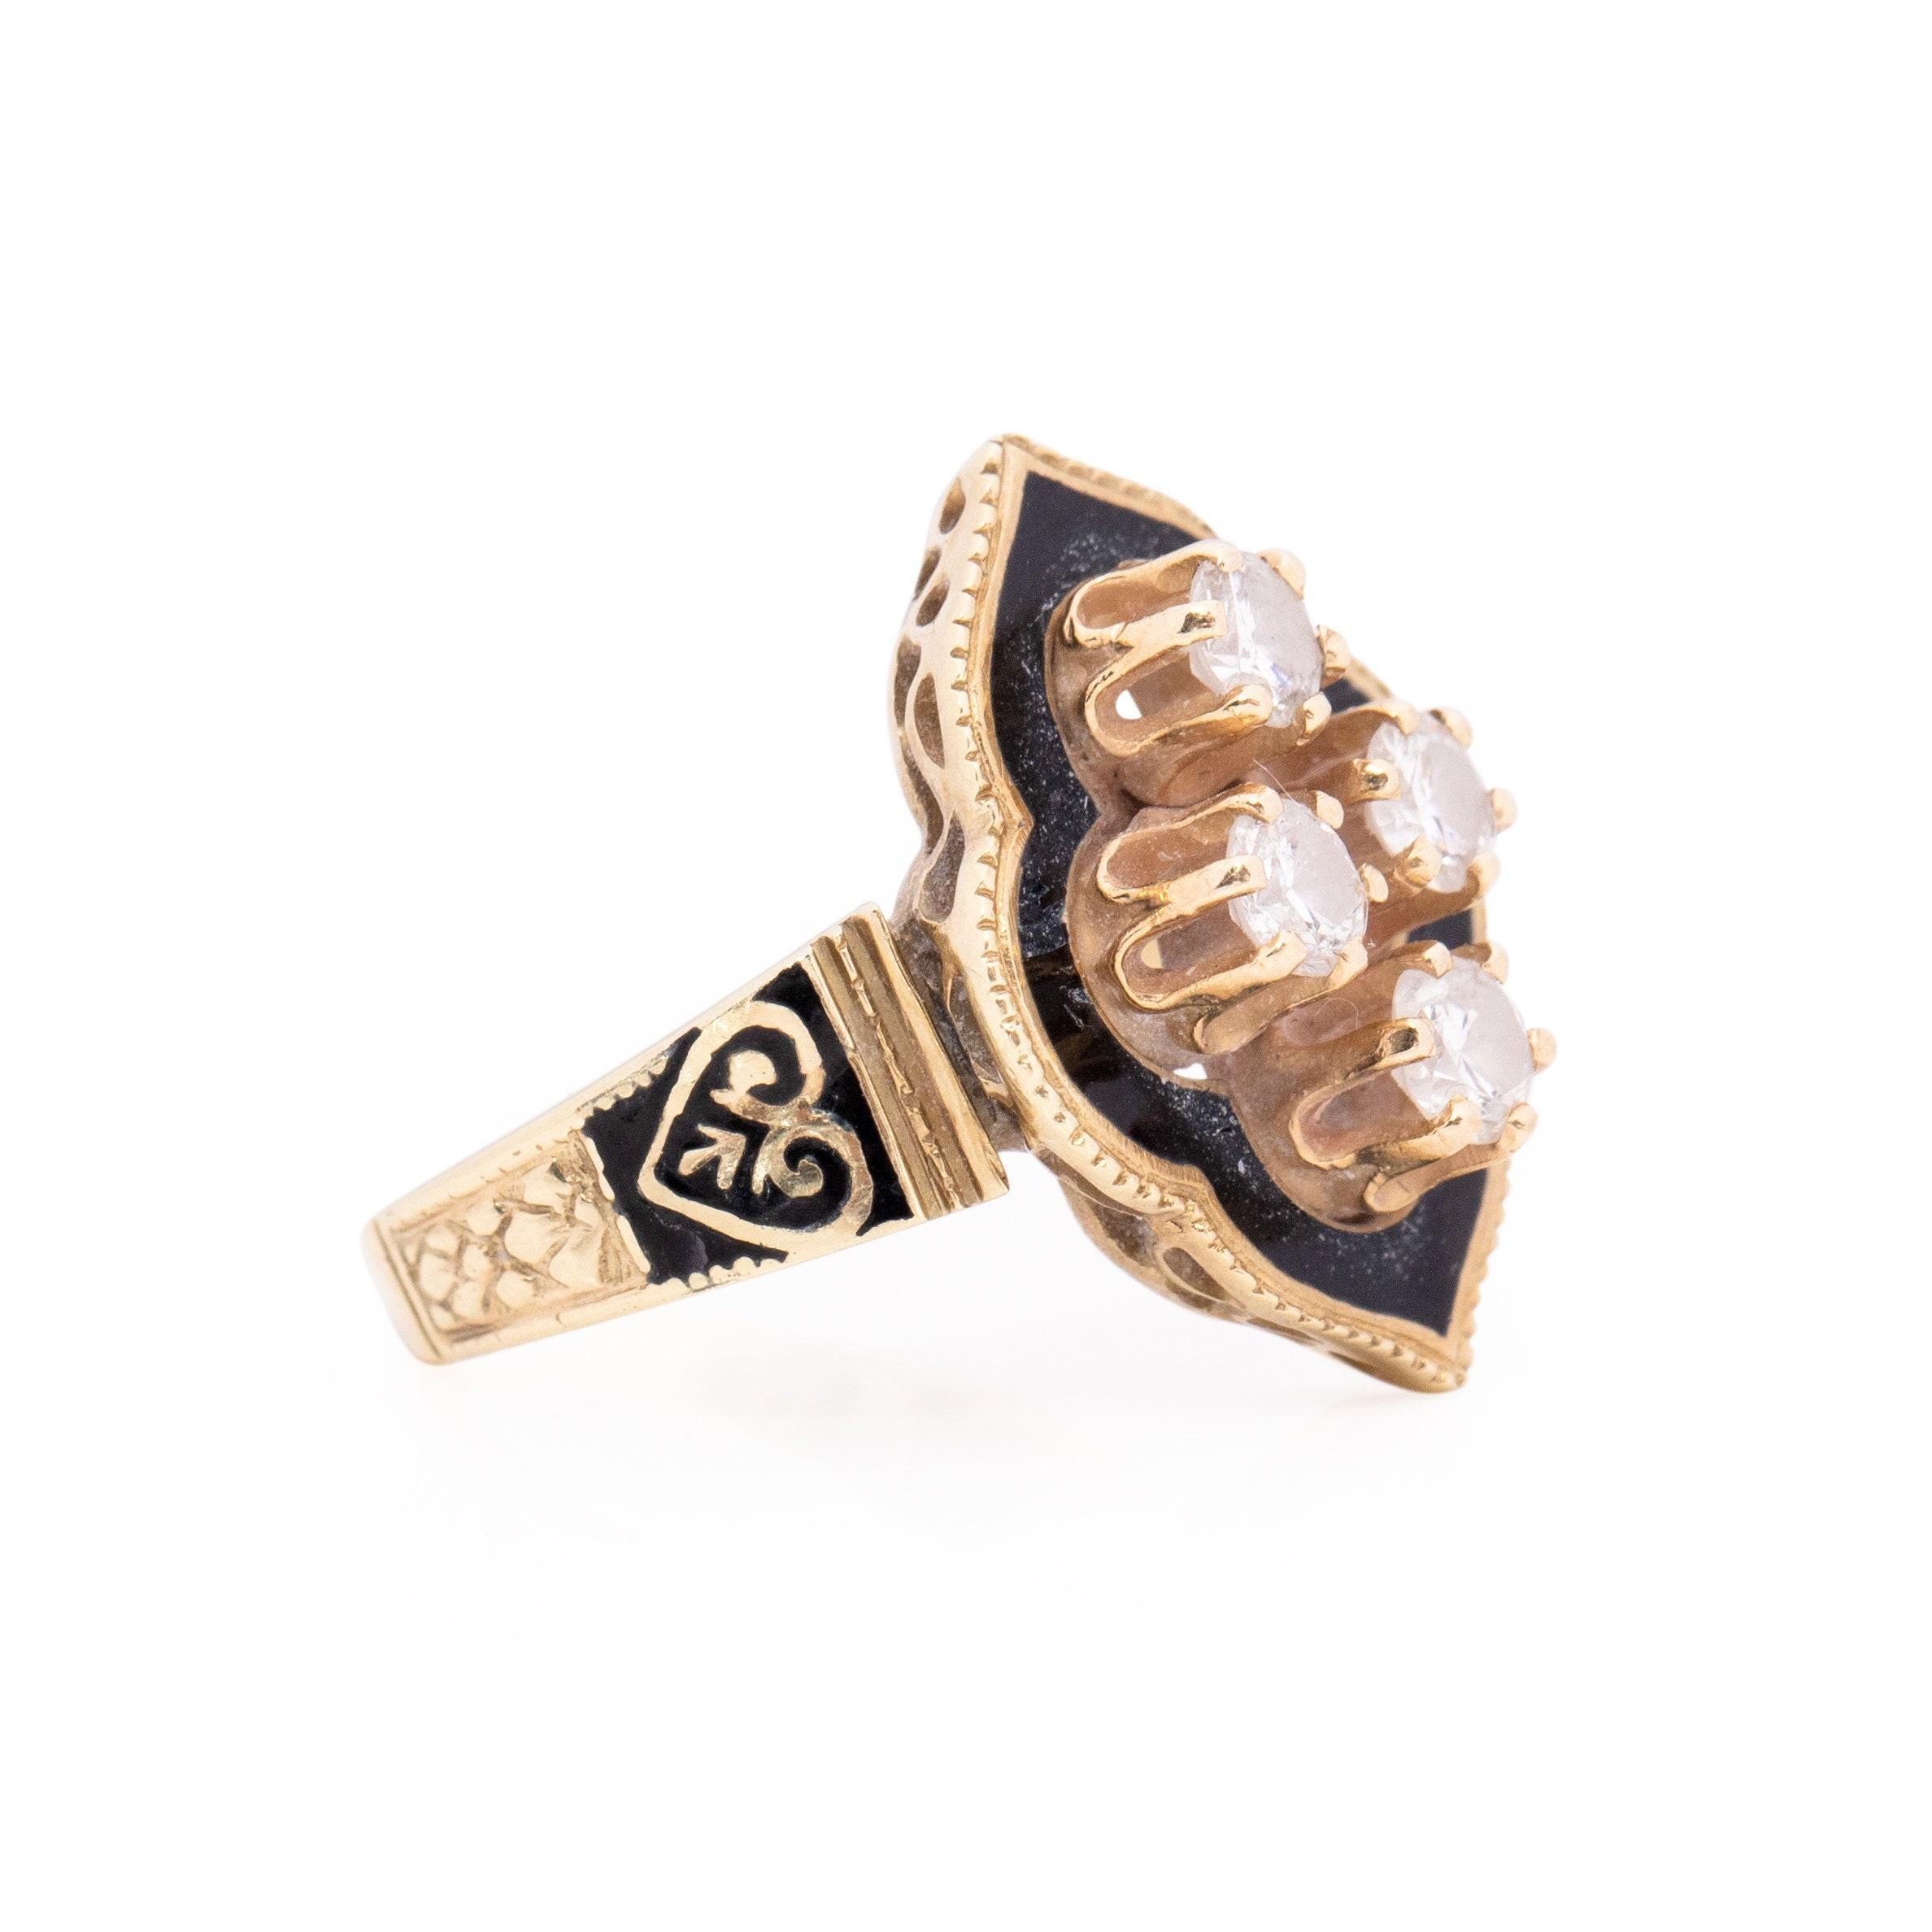 This Victorian piece is a true eye catcher, all the designs work perfectly together to result in this beautiful antique look. Crafted in 14K yellow gold with black enamel accents. The over all shape of the gallery is a alhambra with a simple